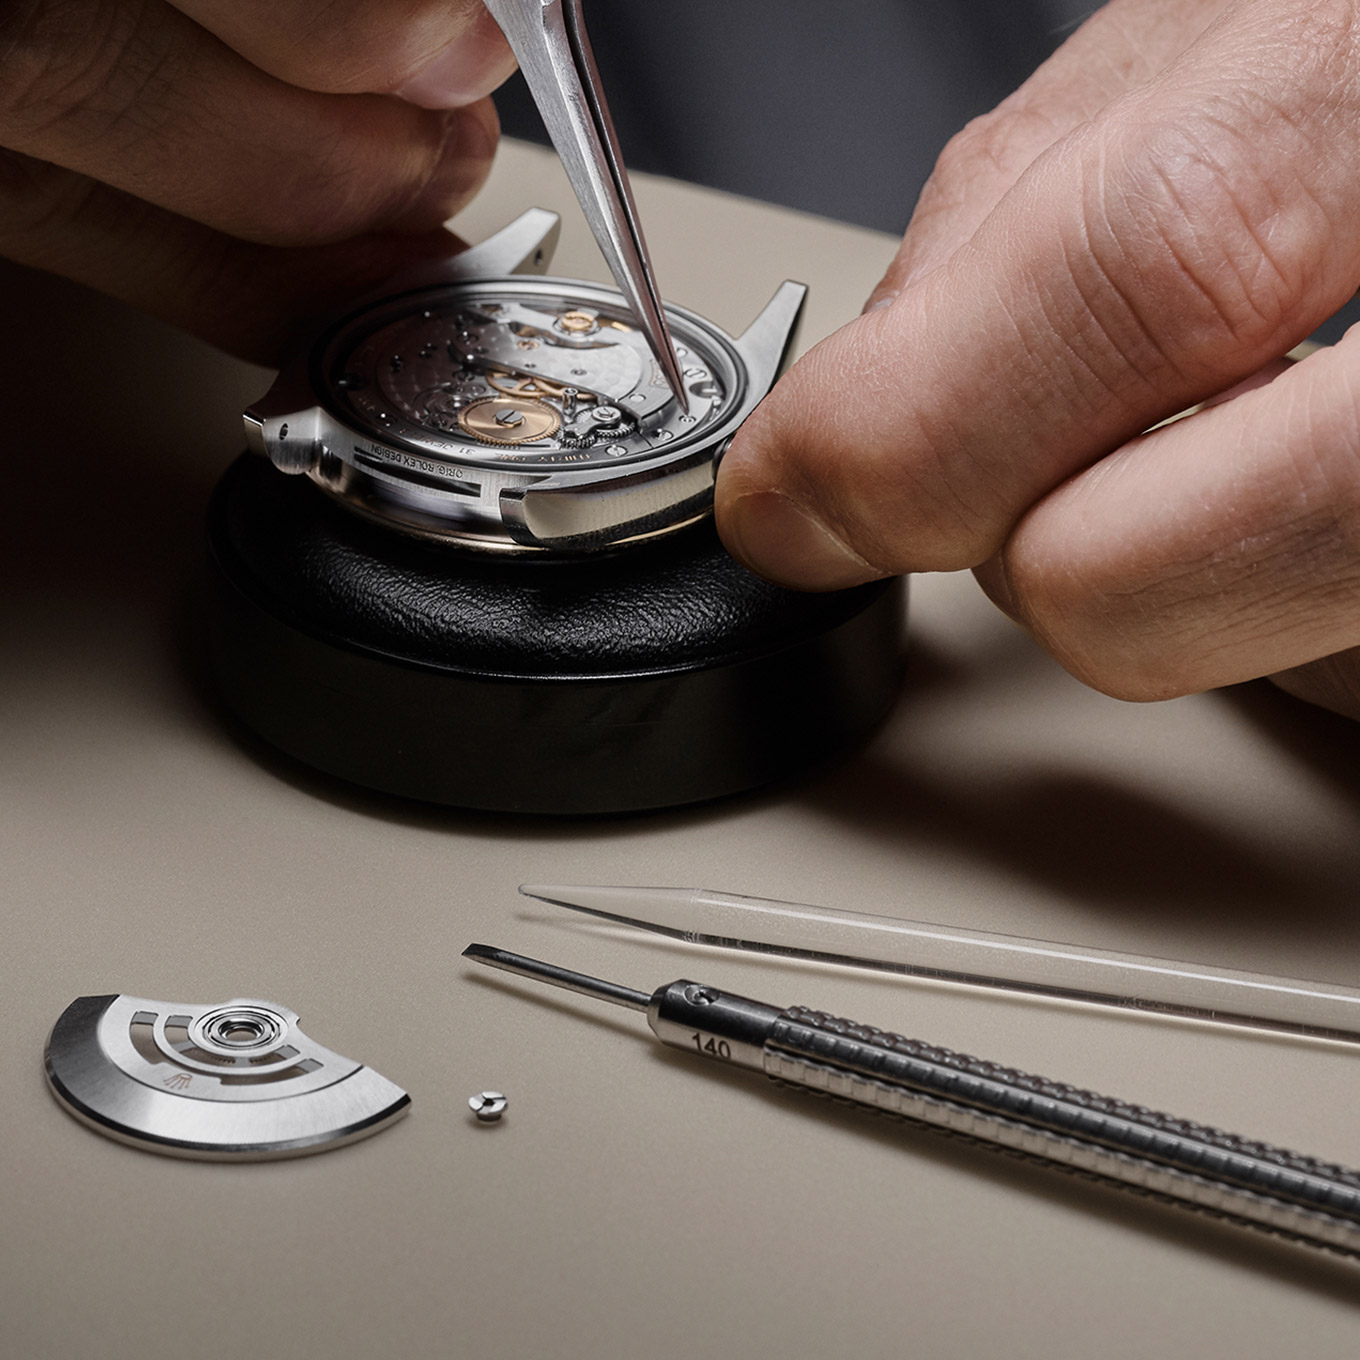 Rolex servicing at Global Watch Company in Vancouver, Canada